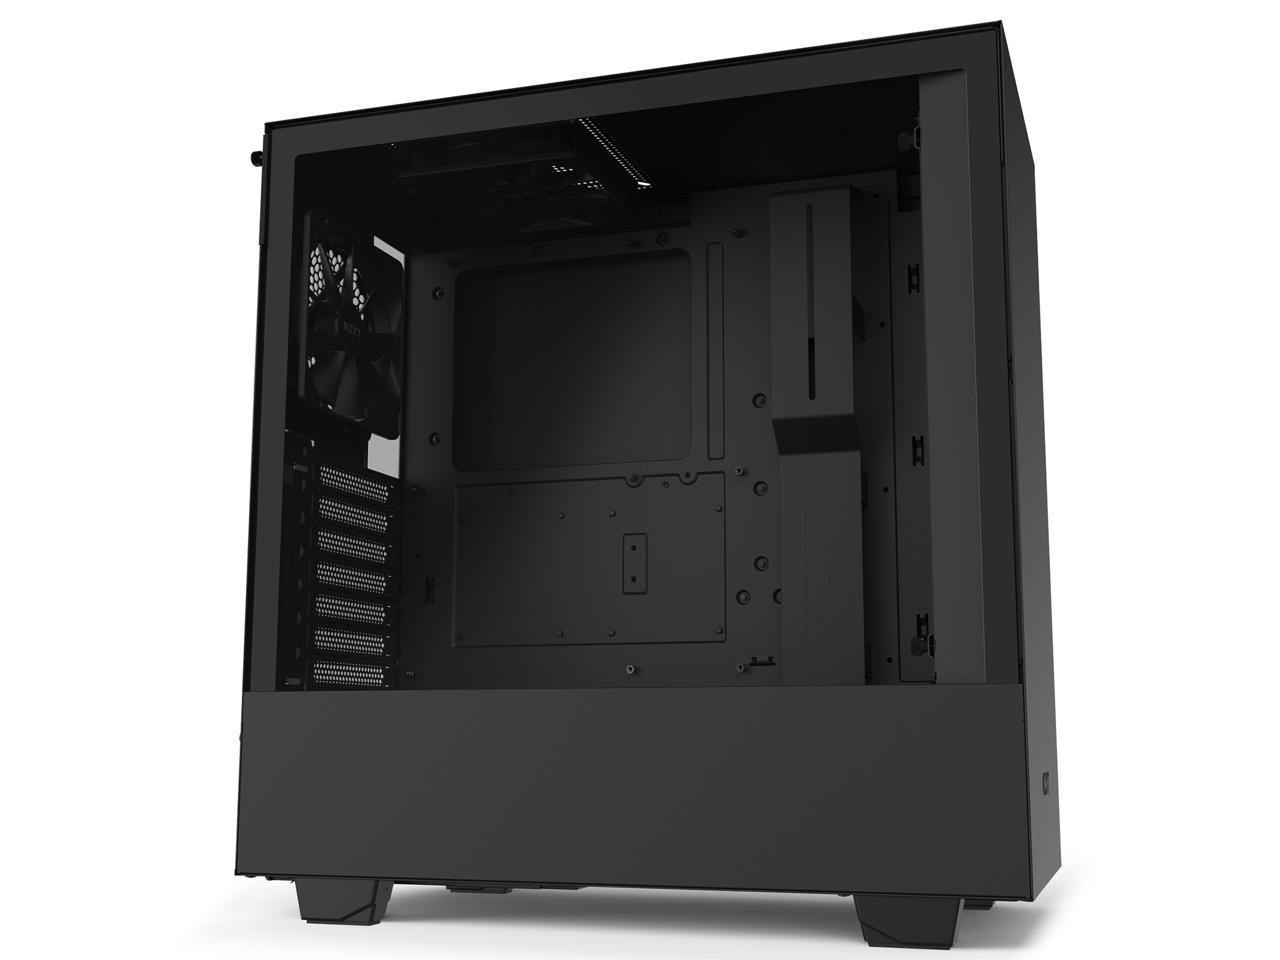 NZXT H510 - Compact Atx Mid-Tower PC Gaming Case - Front I/O Usb Type-C Port - Tempered Glass Side Panel - Cable Management System - Water-Cooling Ready - Steel Construction - Black